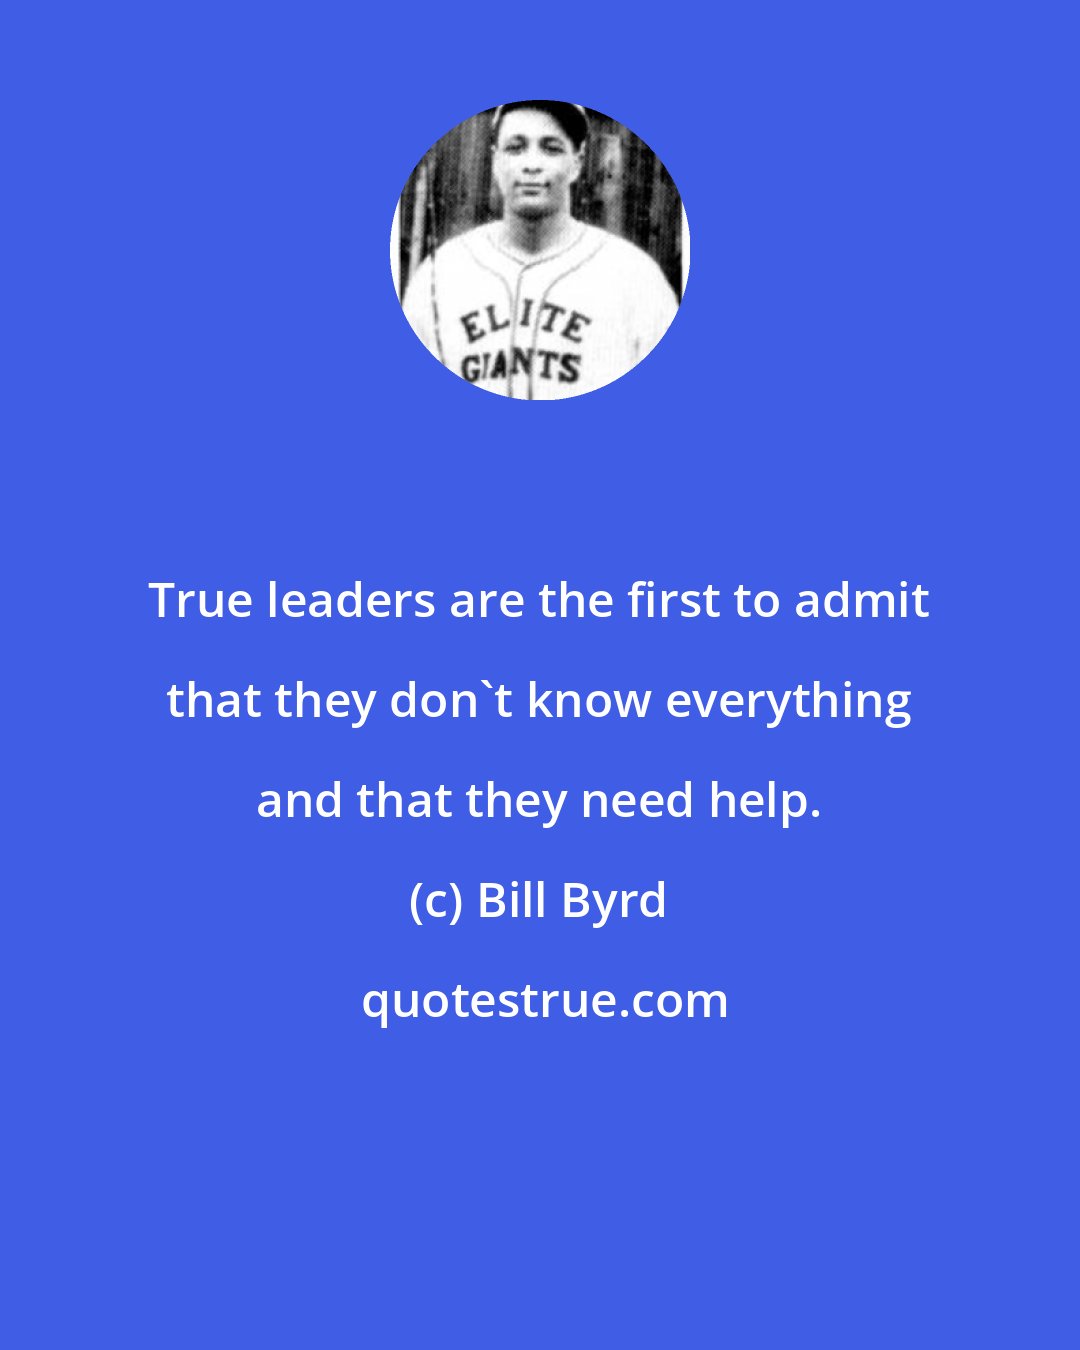 Bill Byrd: True leaders are the first to admit that they don't know everything and that they need help.